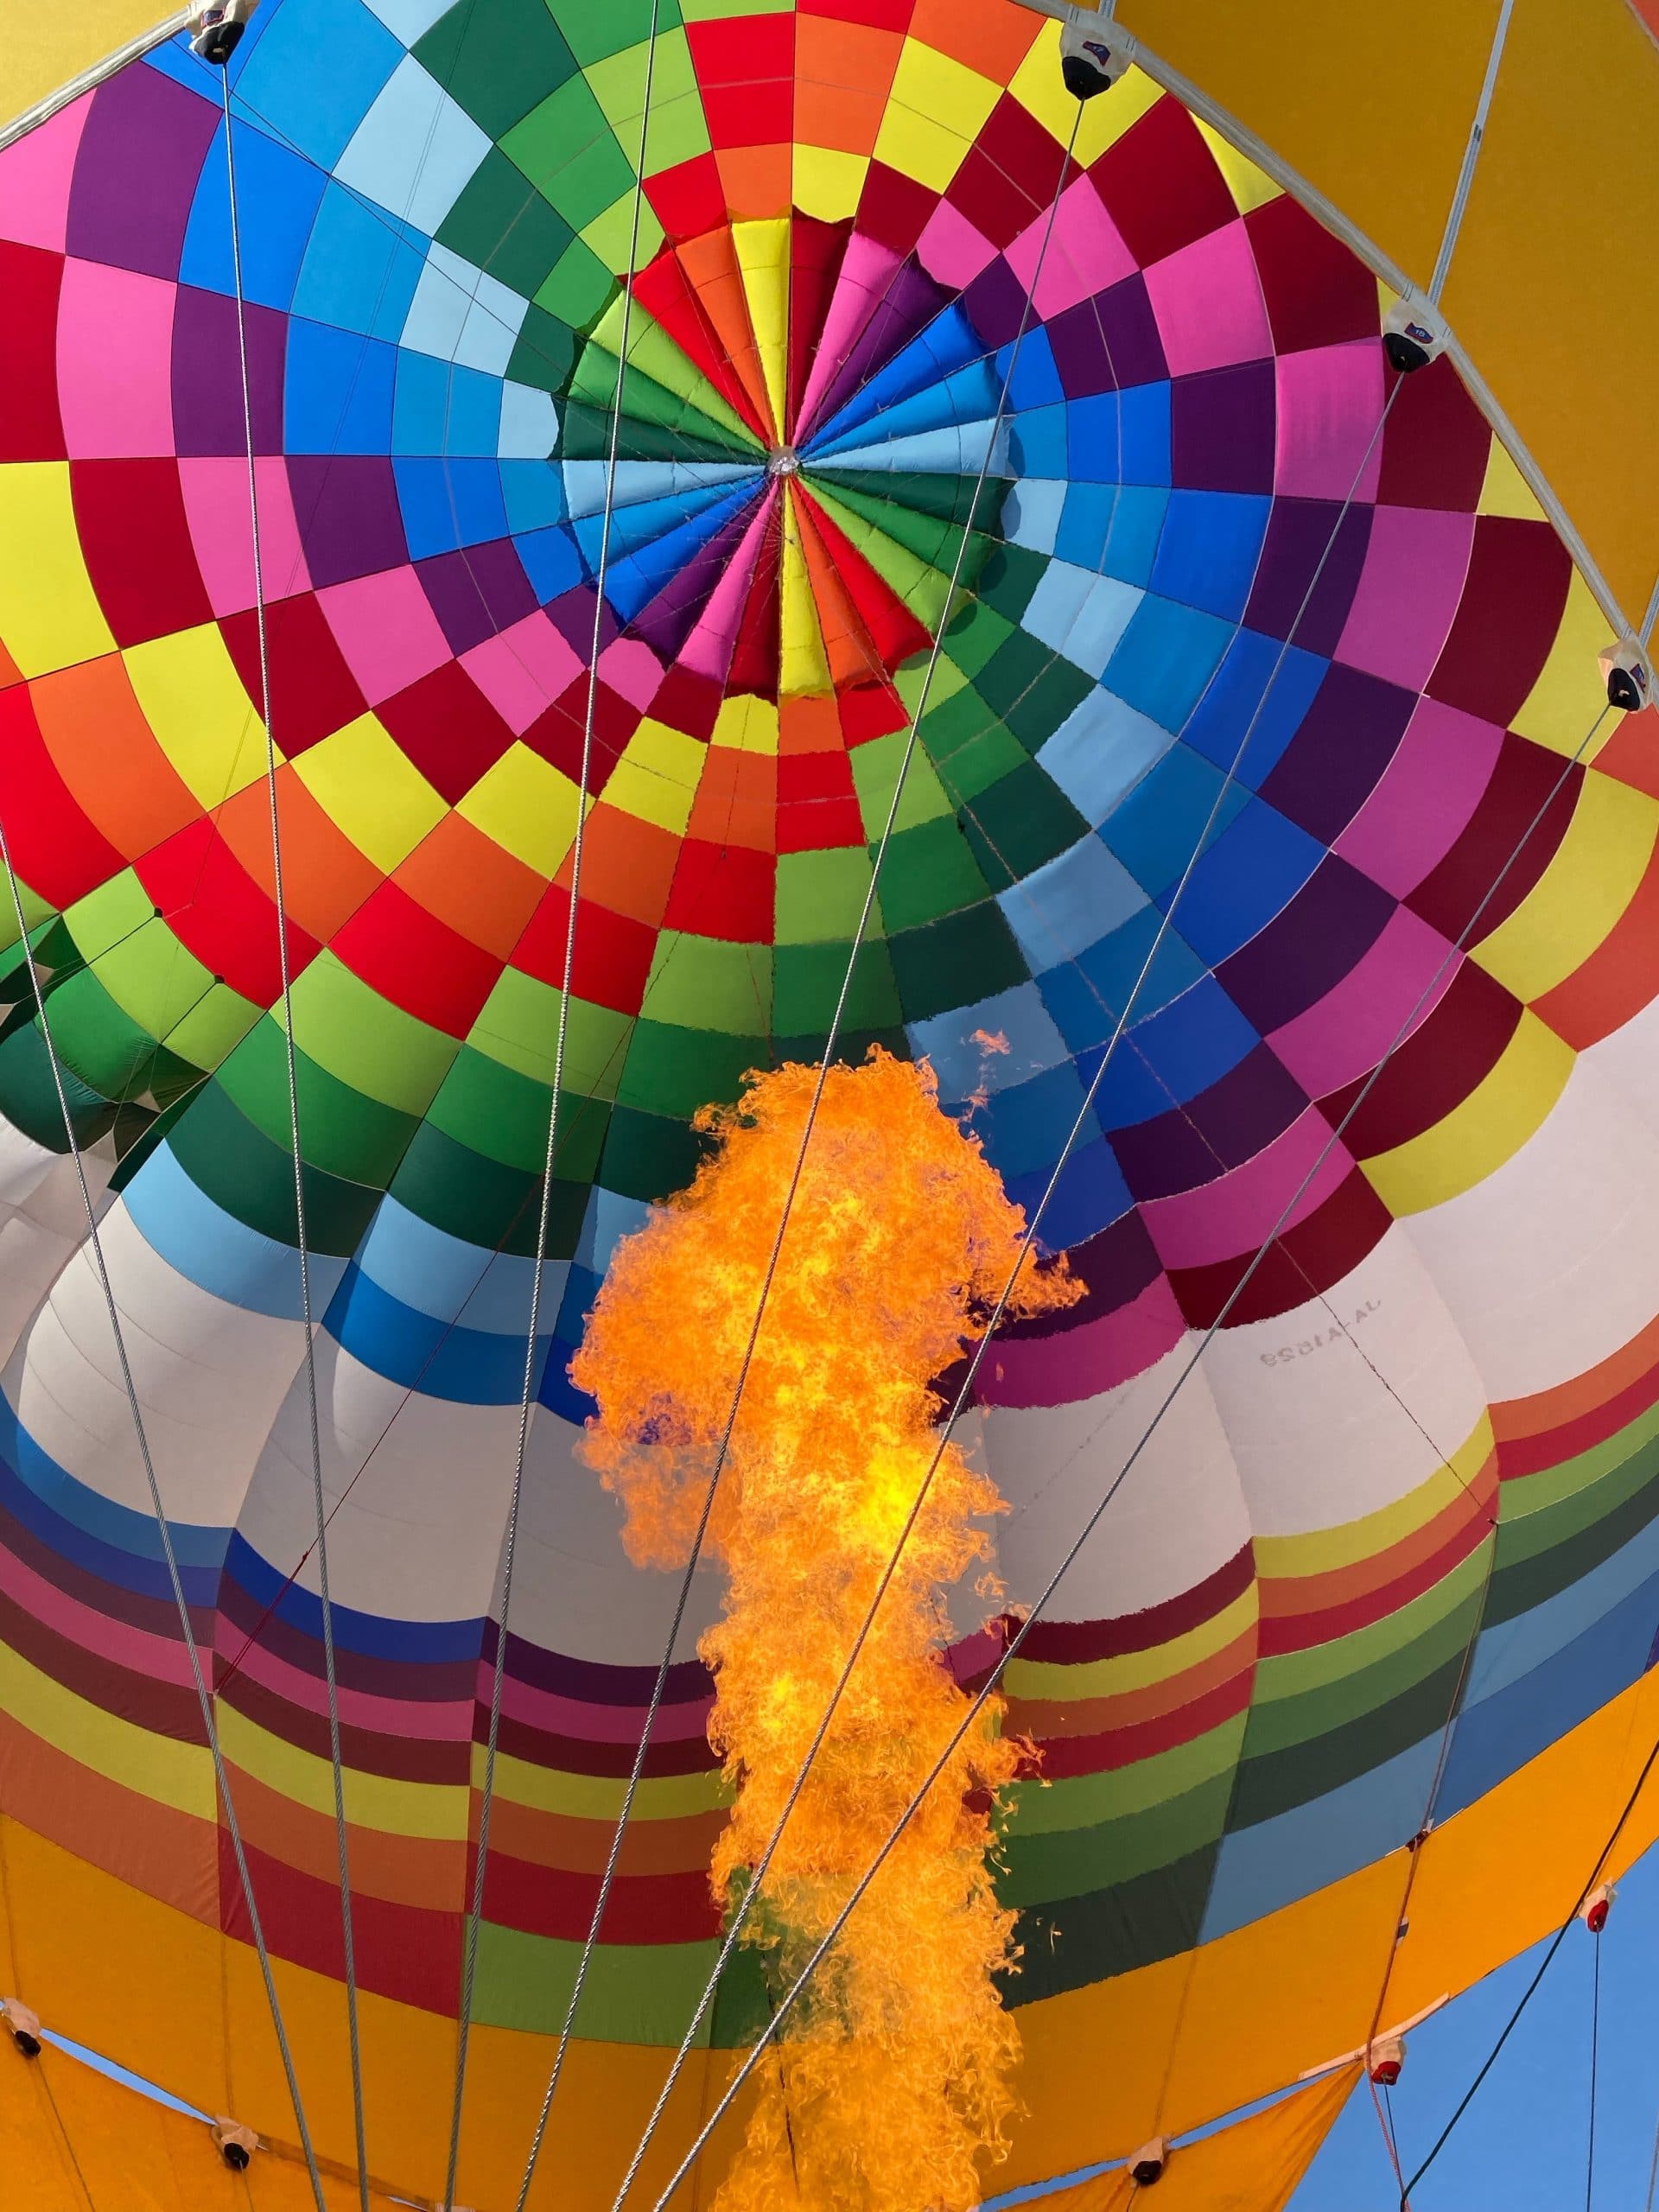 The inside of a hot air balloon